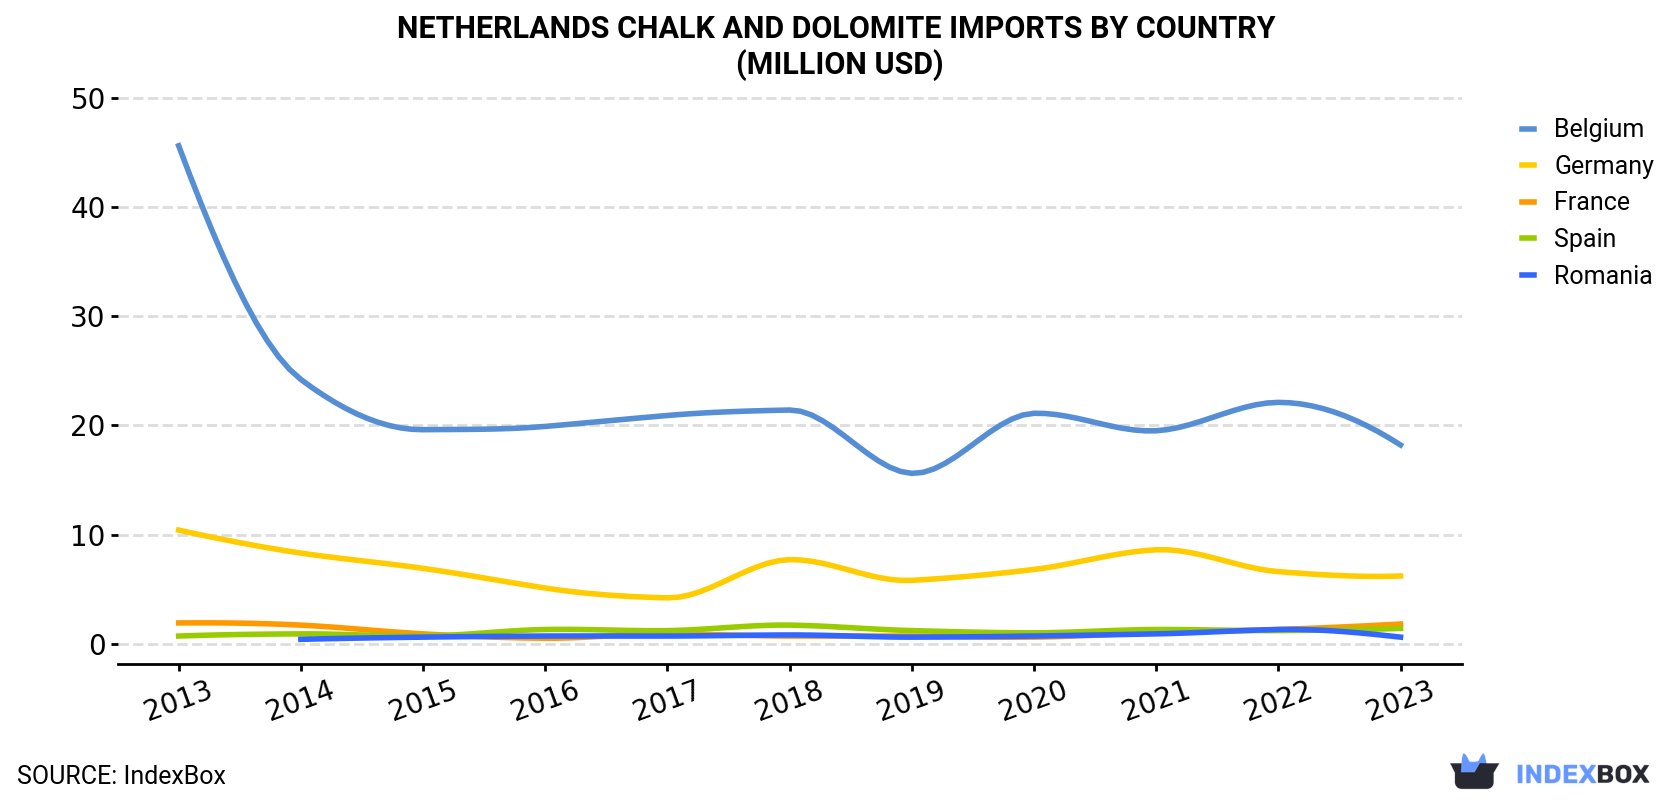 Netherlands Chalk And Dolomite Imports By Country (Million USD)